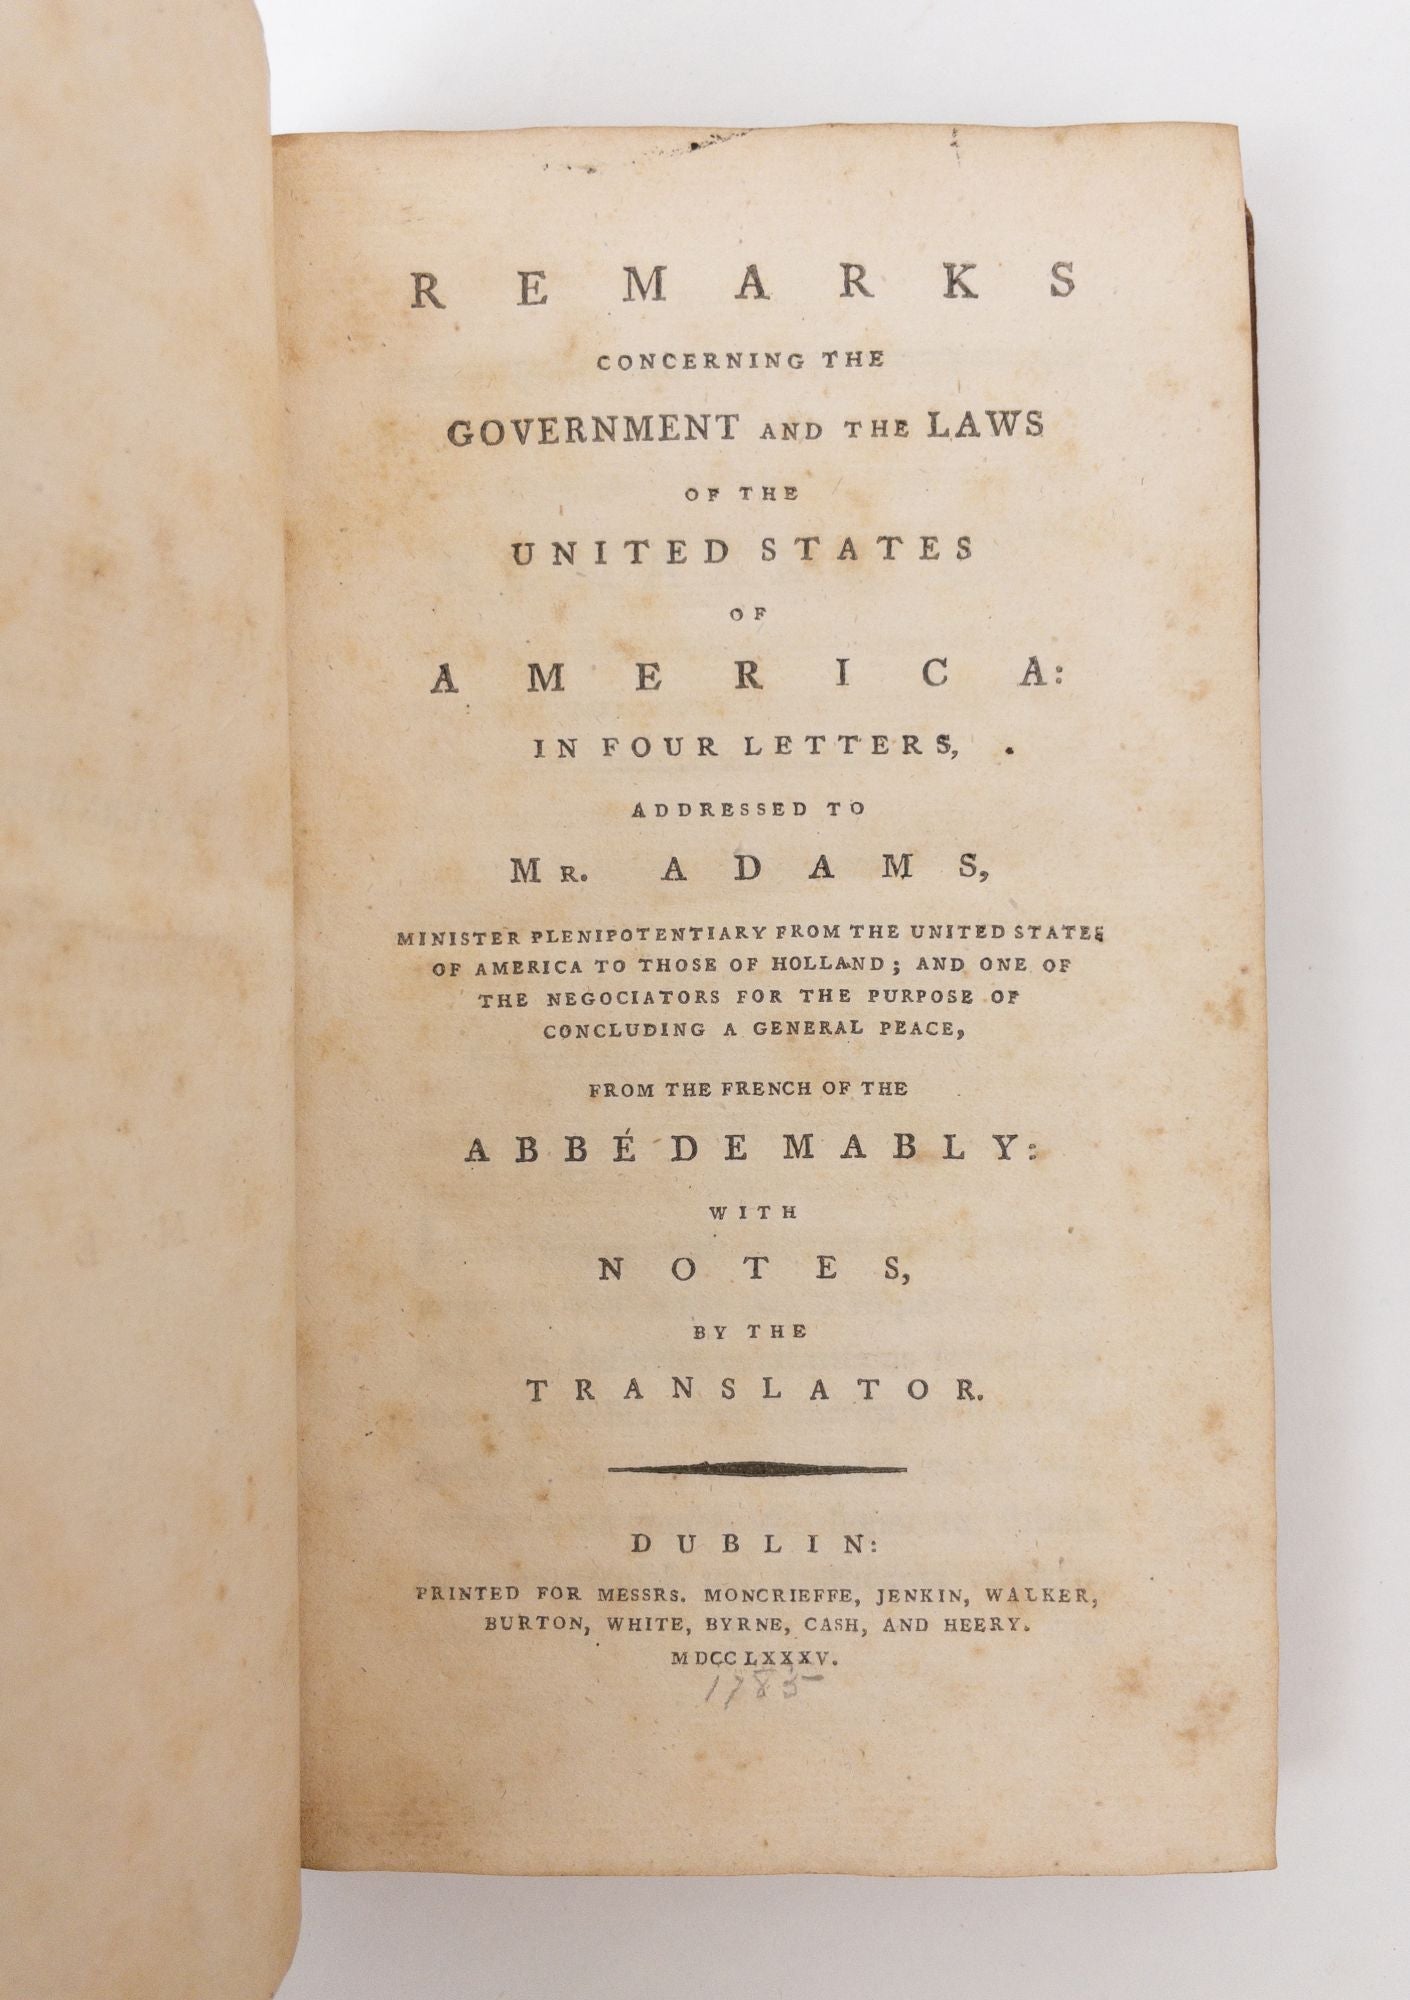 Product Image for REMARKS CONCERNING THE GOVERNMENT AND THE LAWS OF THE UNITED STATES OF AMERICA: IN FOUR LETTERS ADDRESSED TO MR. ADAMS